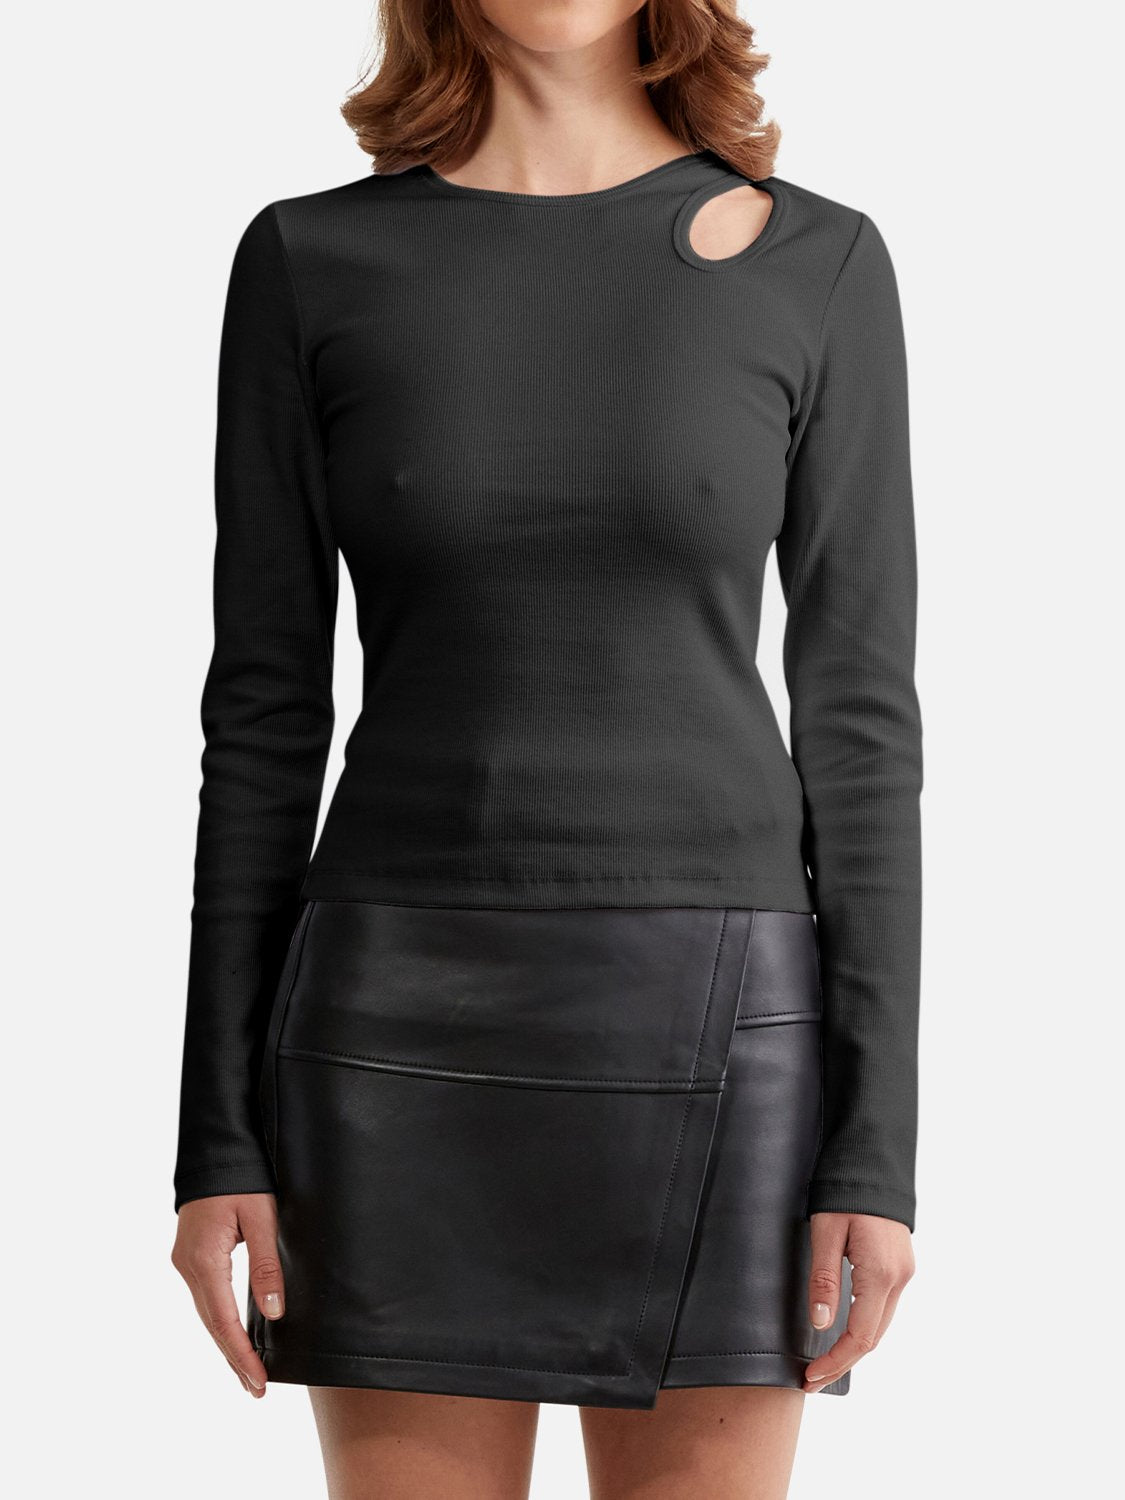 NORA CUT OUT LONG SLEEVE TOP - BLACK